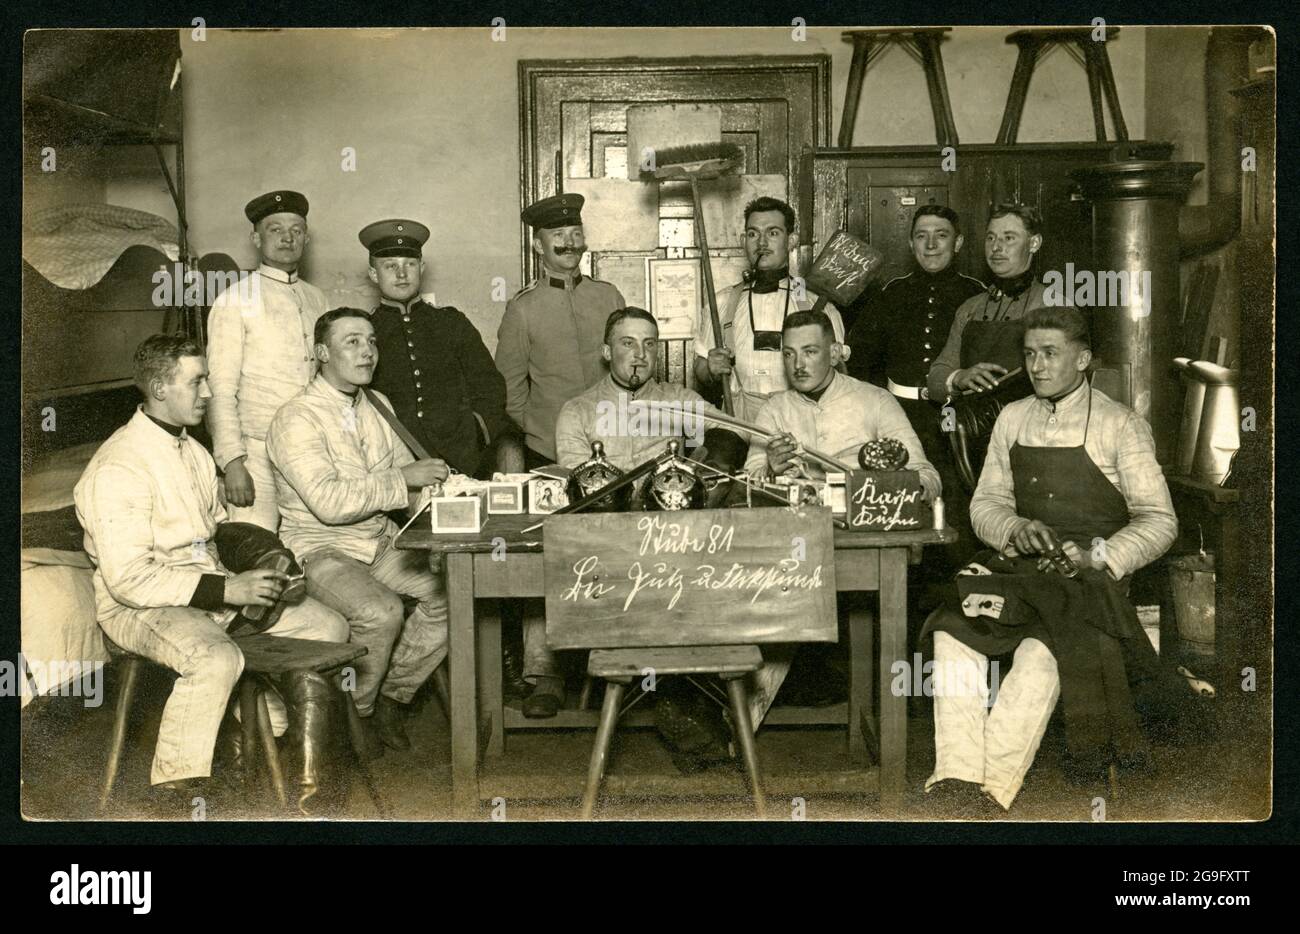 Europe, Germany, Lower Saxony, Hannover, military, group photo of soldiers of the room 81, ADDITIONAL-RIGHTS-CLEARANCE-INFO-NOT-AVAILABLE Stock Photo